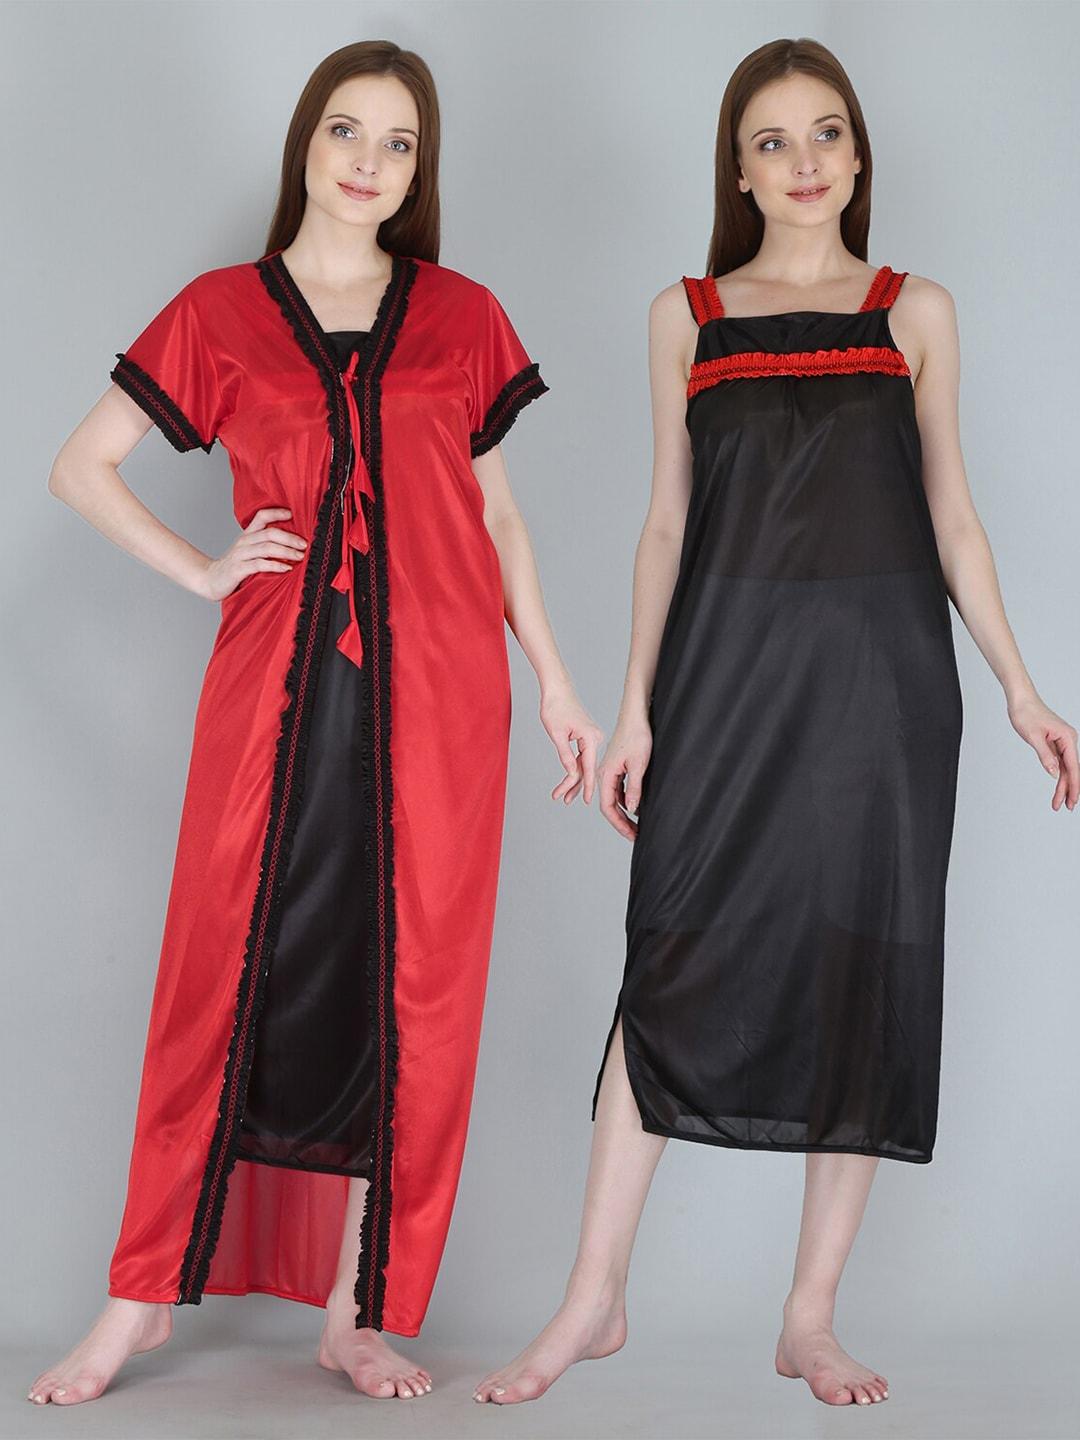 be you red maxi nightdress